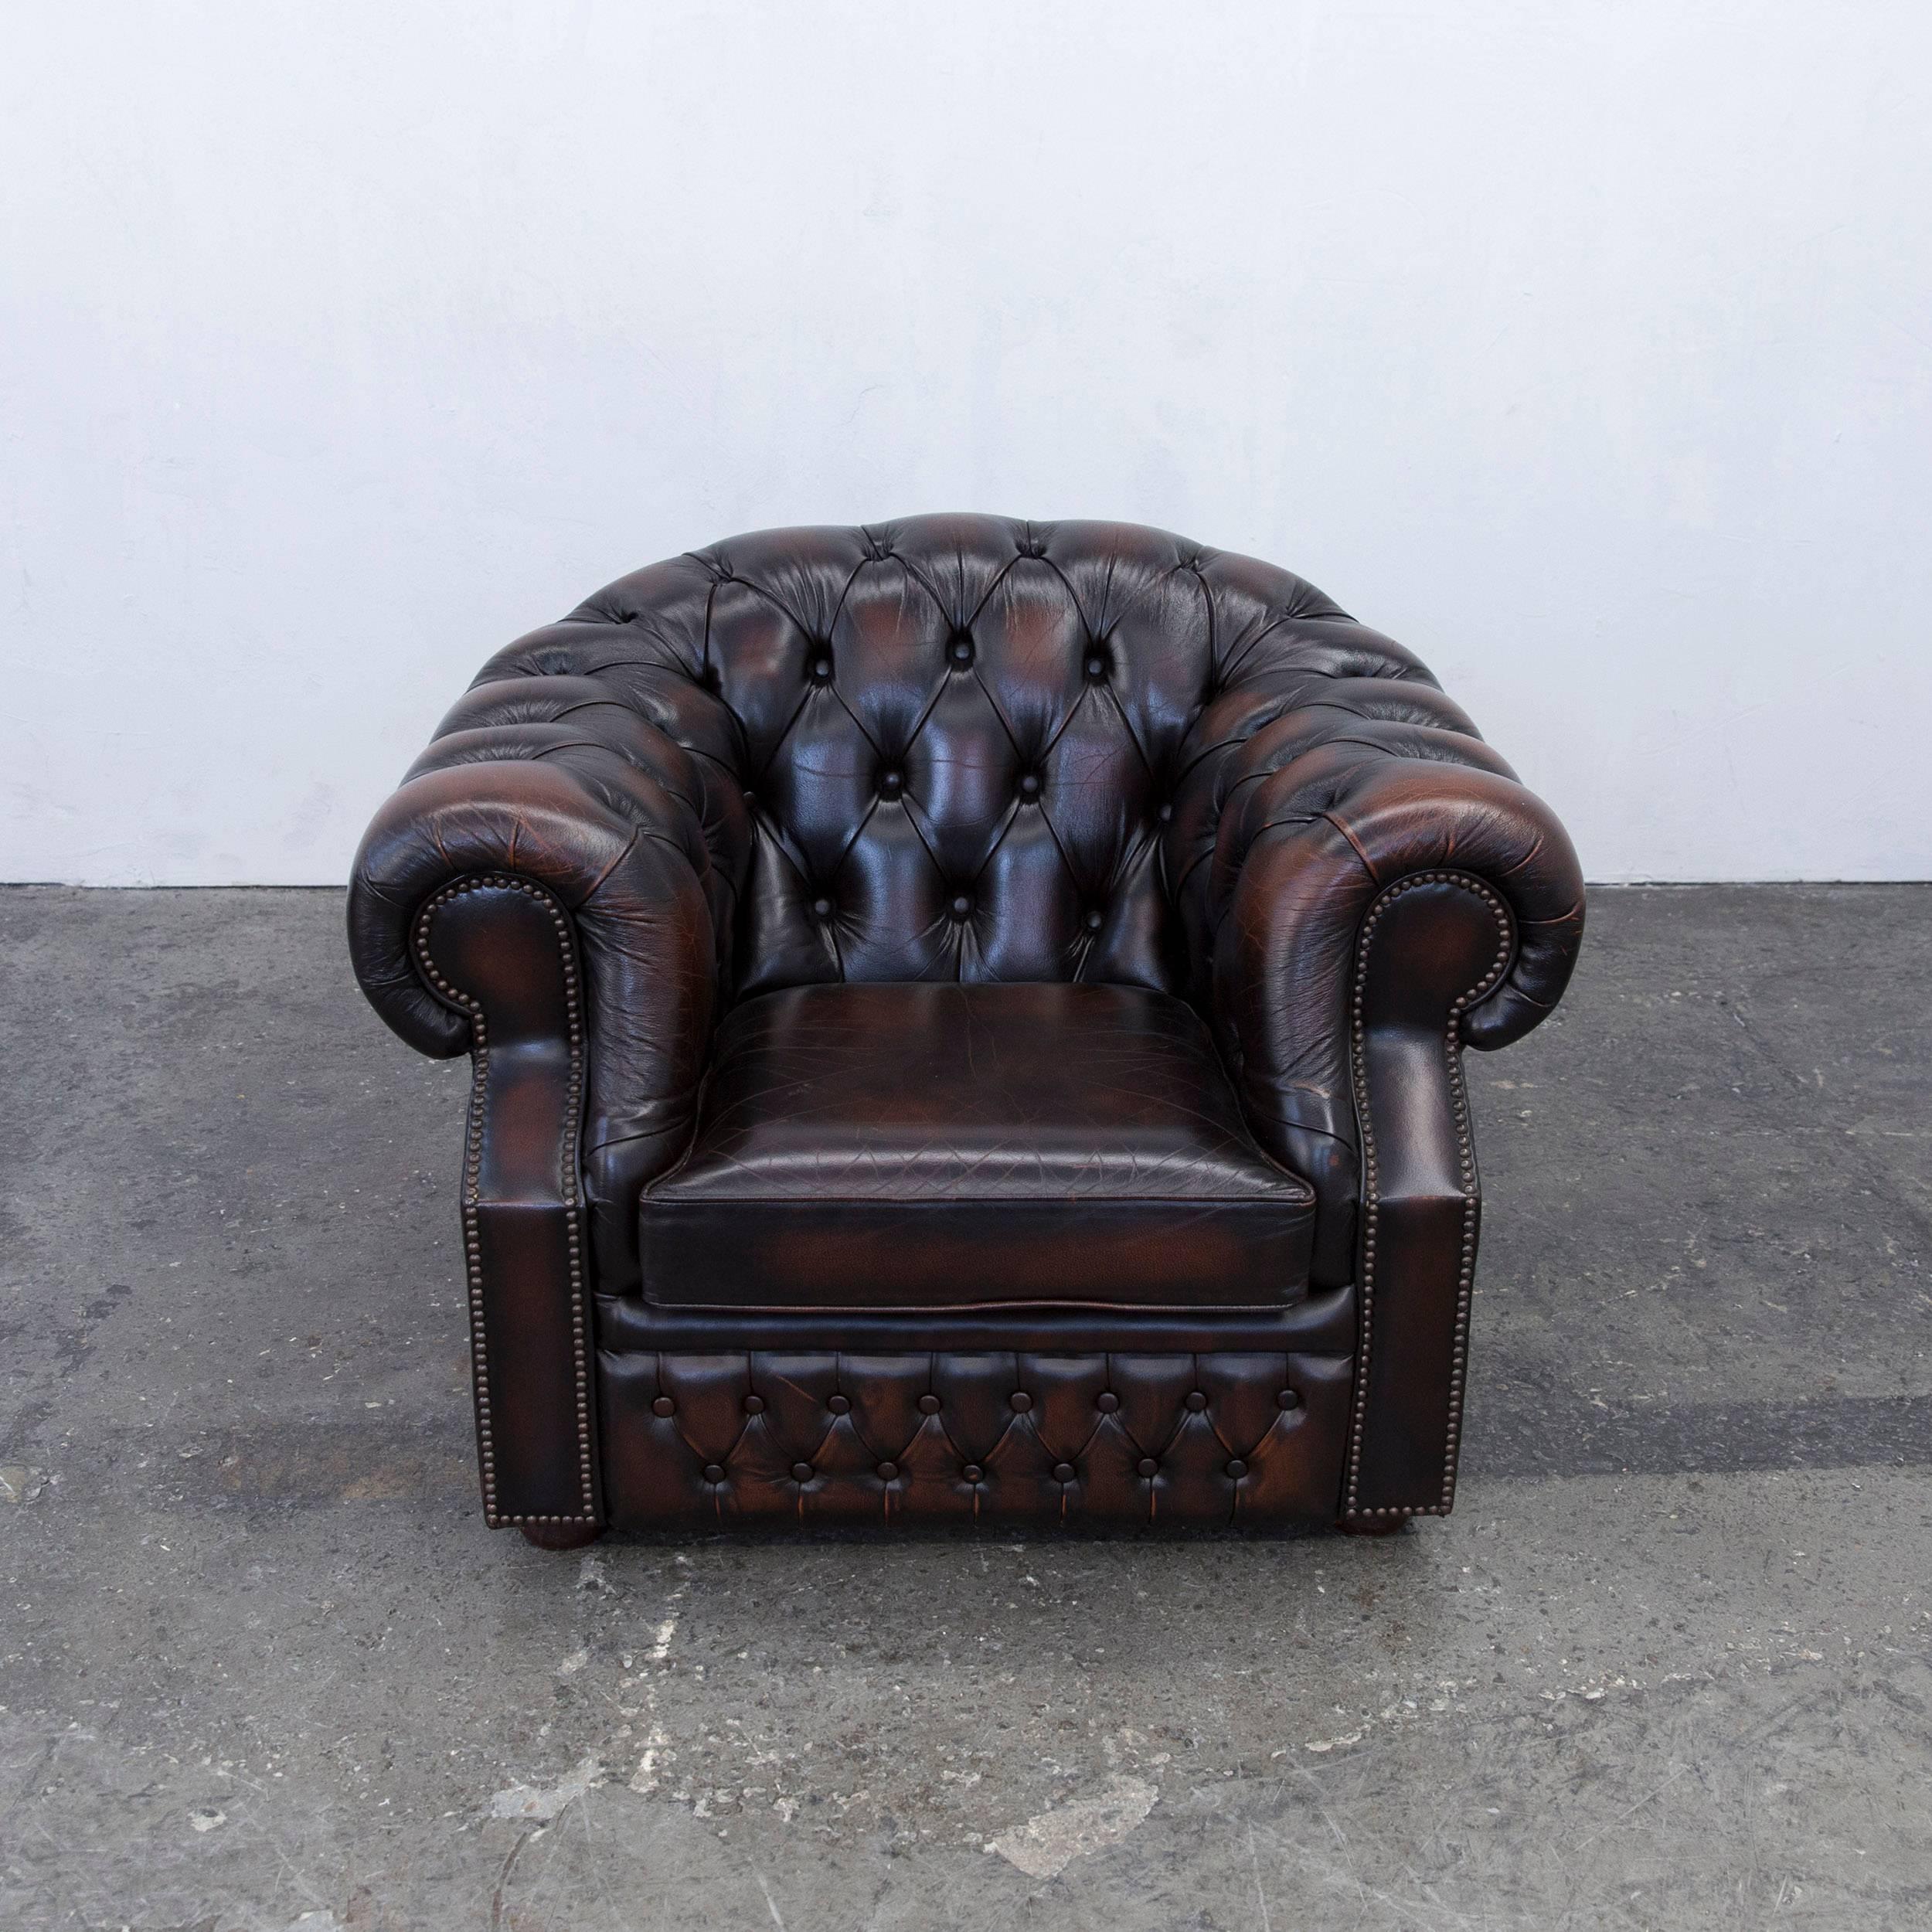 British Chesterfield Armchair Leather Brown One Seat Couch Vintage Retro